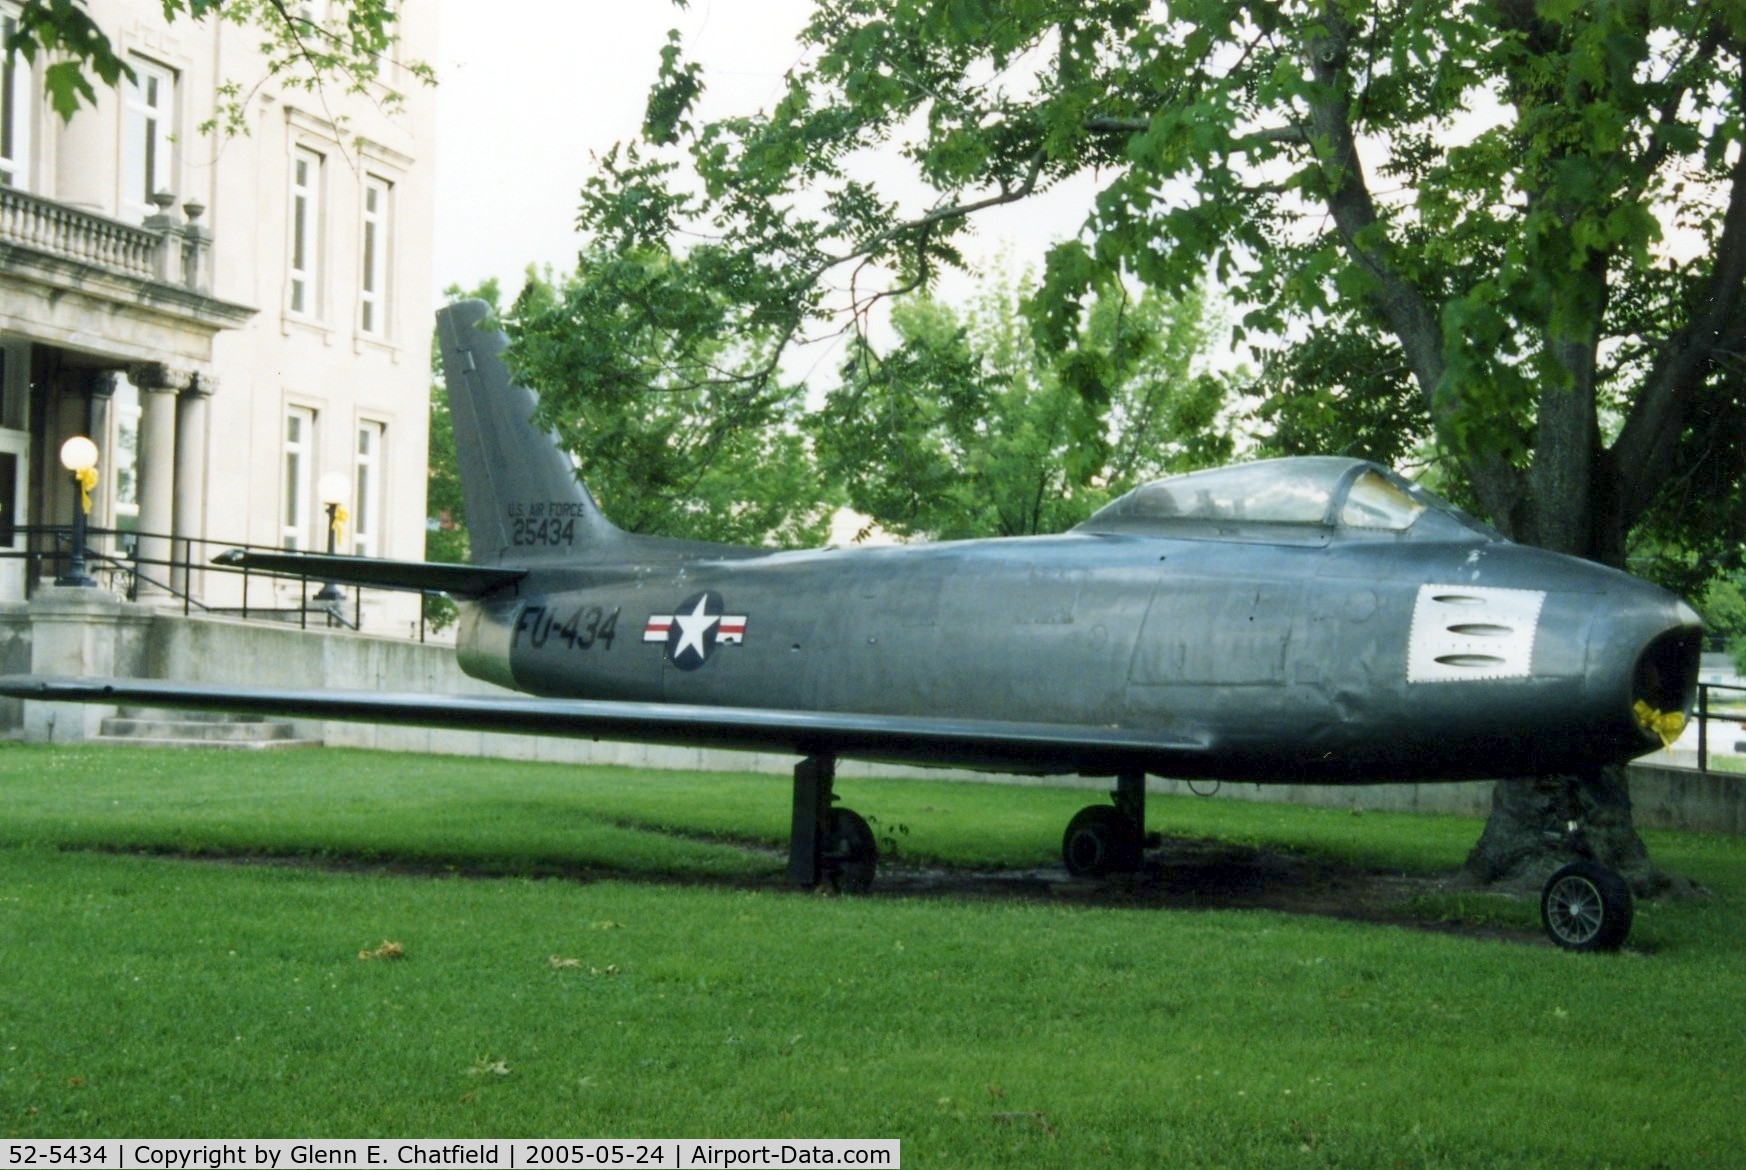 52-5434, 1952 North American F-86F-25-NA Sabre C/N 193-163, F-86F in front of the Clay County Courthouse, Brazil, Indiana